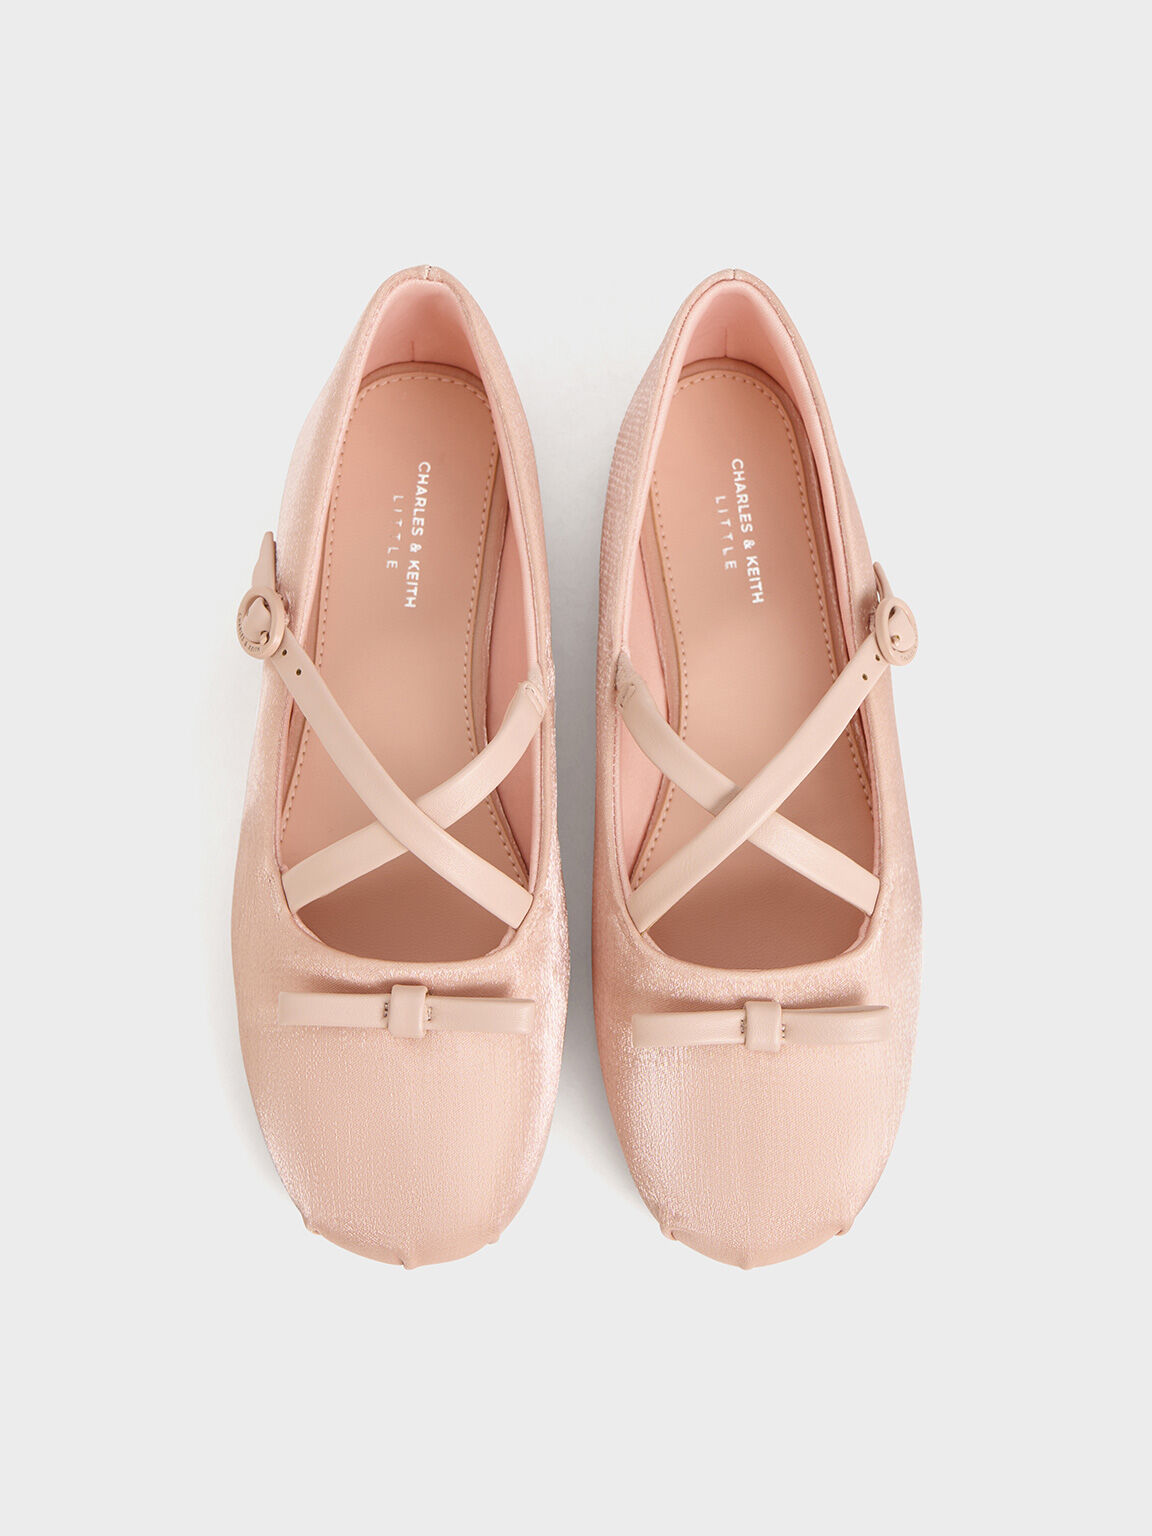 Girls' Bow Mary Janes, Light Pink, hi-res